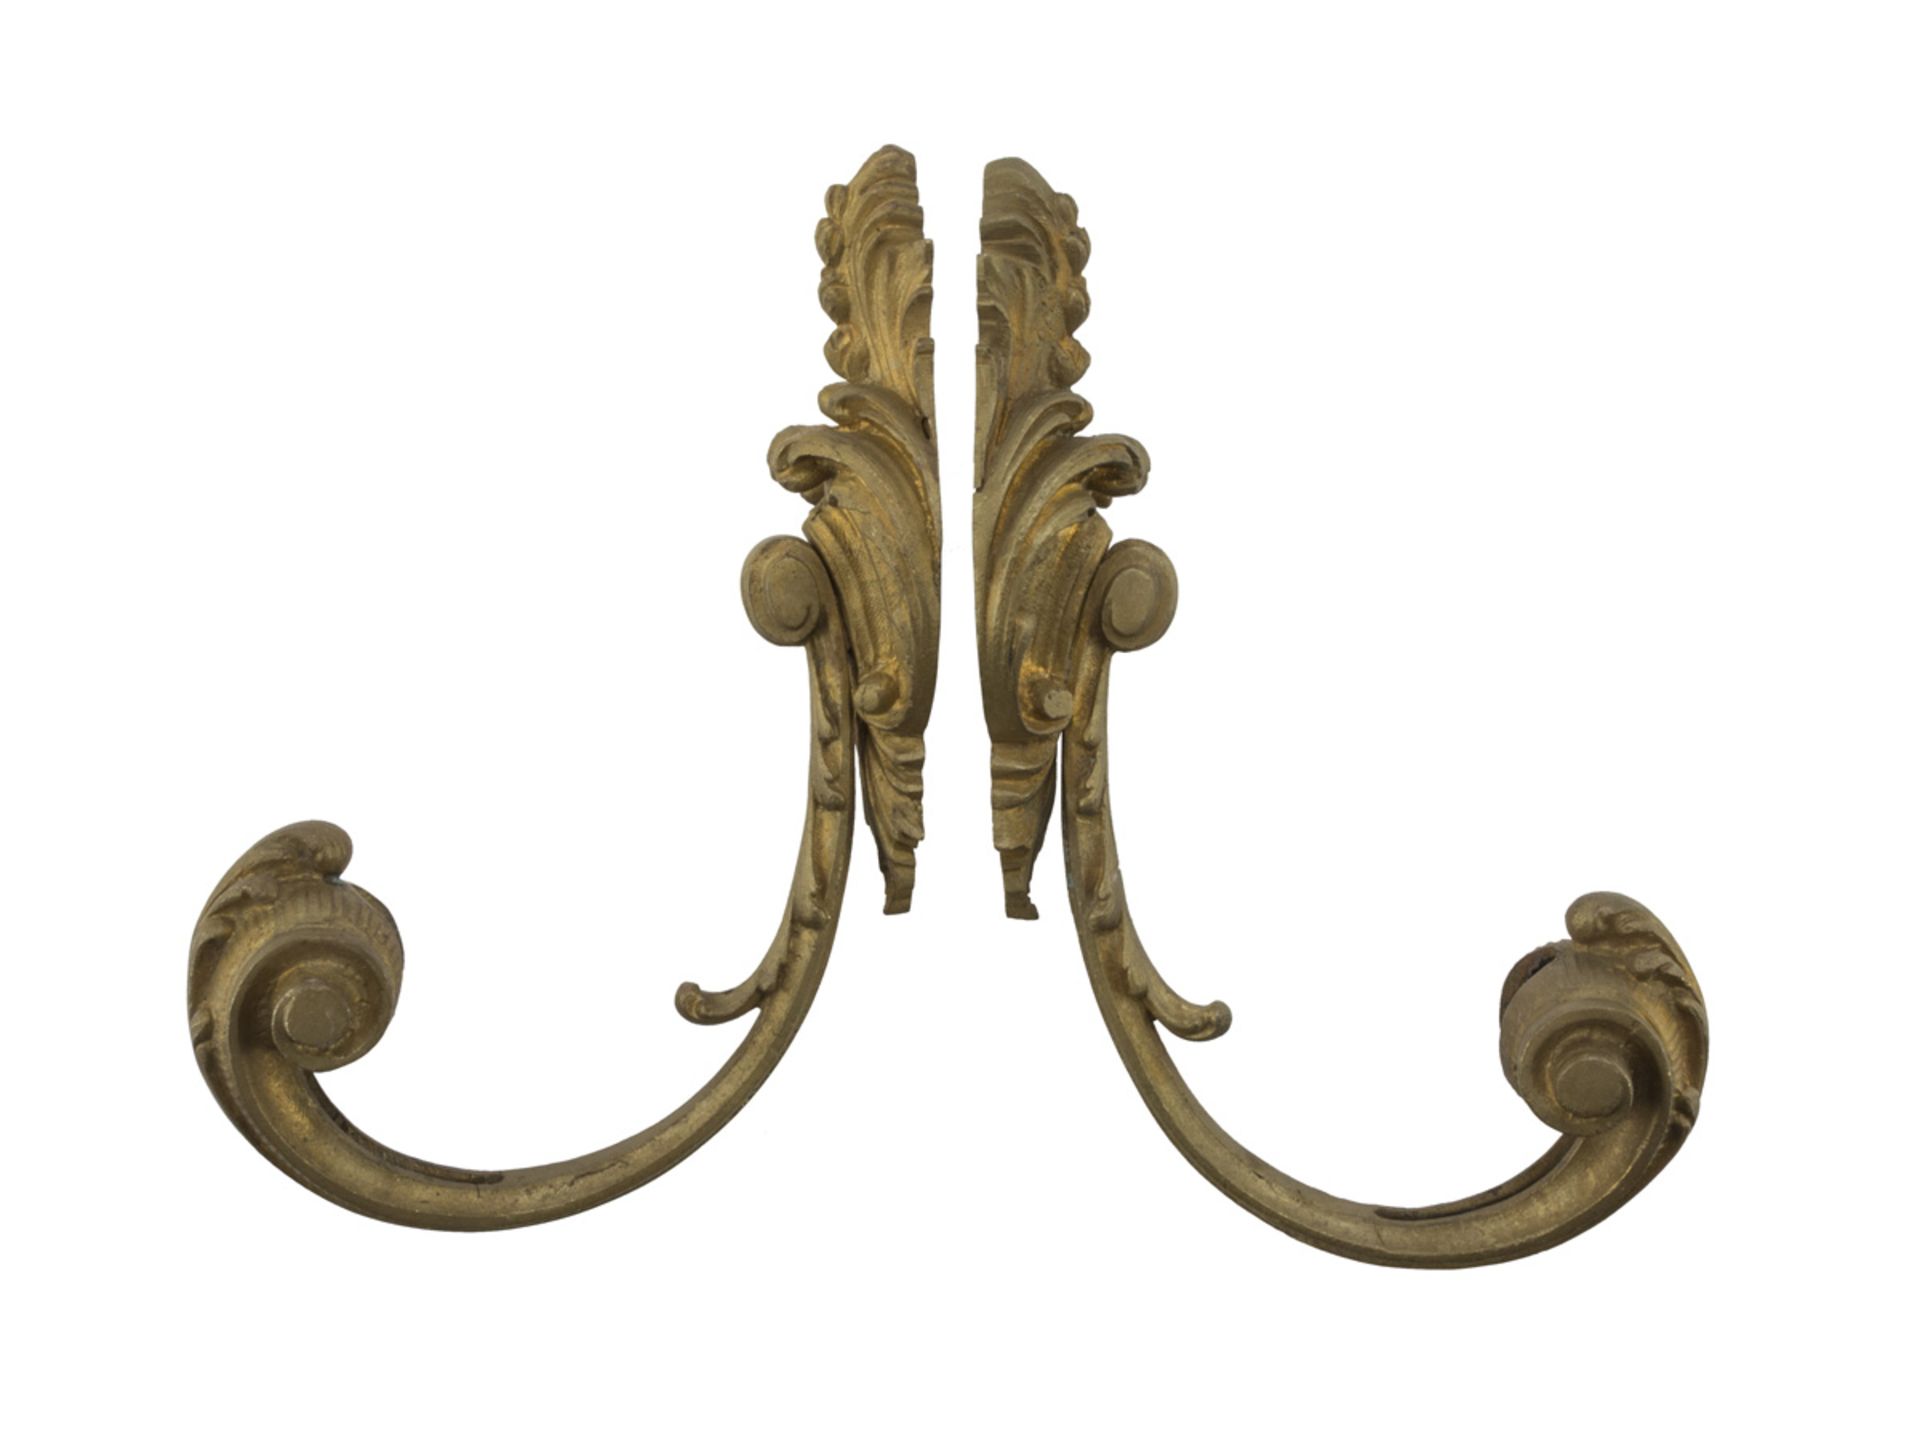 A PAIR OF ORMOLU CURTAIN RODS, LATE 18TH CENTURY with leafy arm. Measures cm. 23 x 7 x 16. COPPIA DI